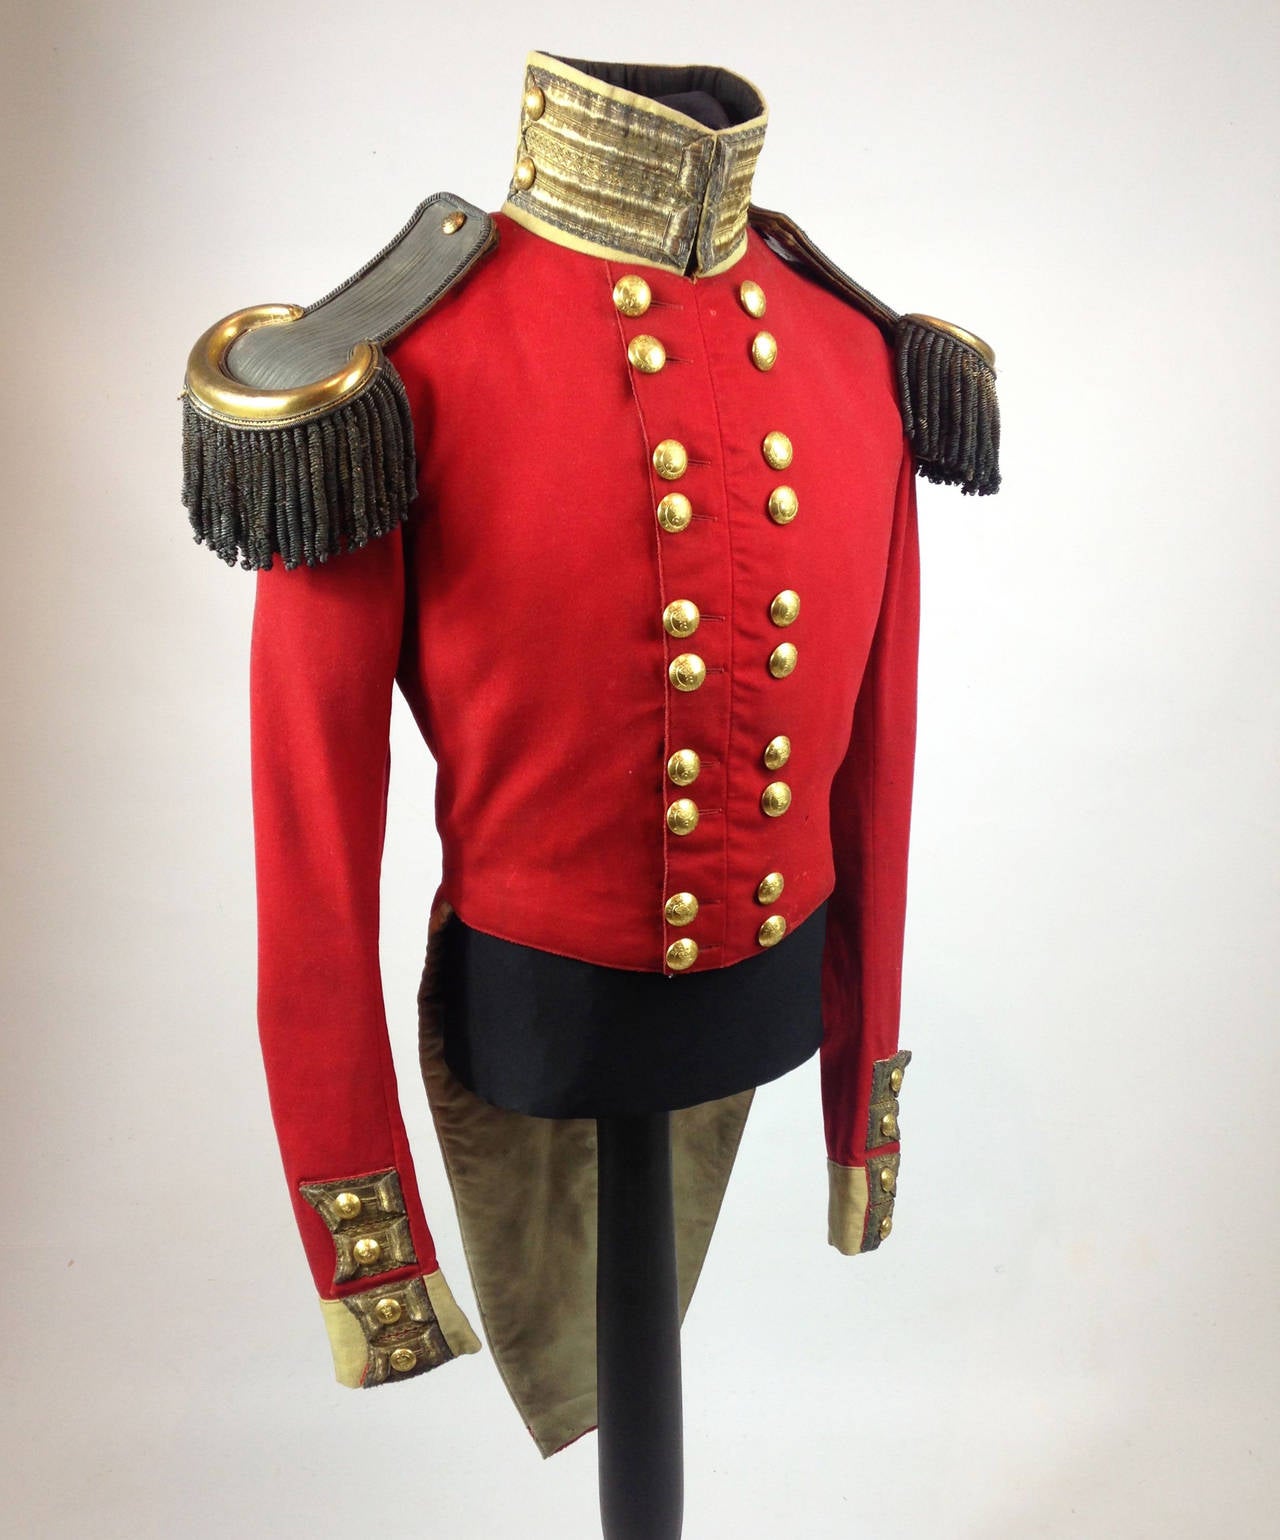 An extremely scarce example of an English officer's coatee to the 67th (South Hampshire) Regiment of Foot.

The tunic of fine scarlet melton cloth and yellow facings is in incredibly good, bright condition for its age despite some light staining